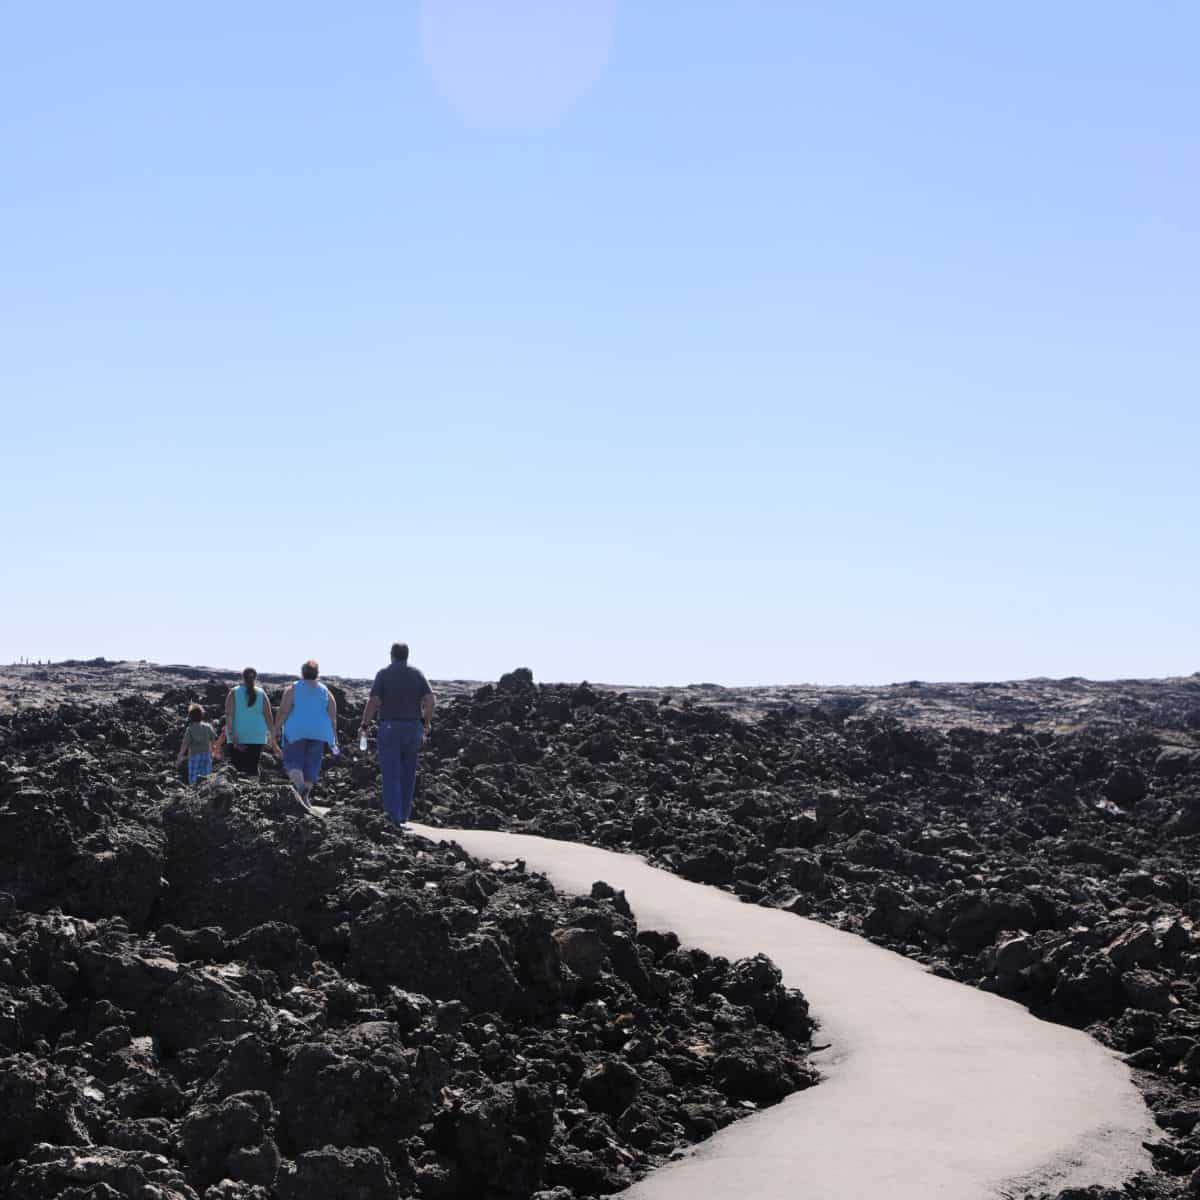 The Caves Trail at Craters of the Moon National Monument and Preserve